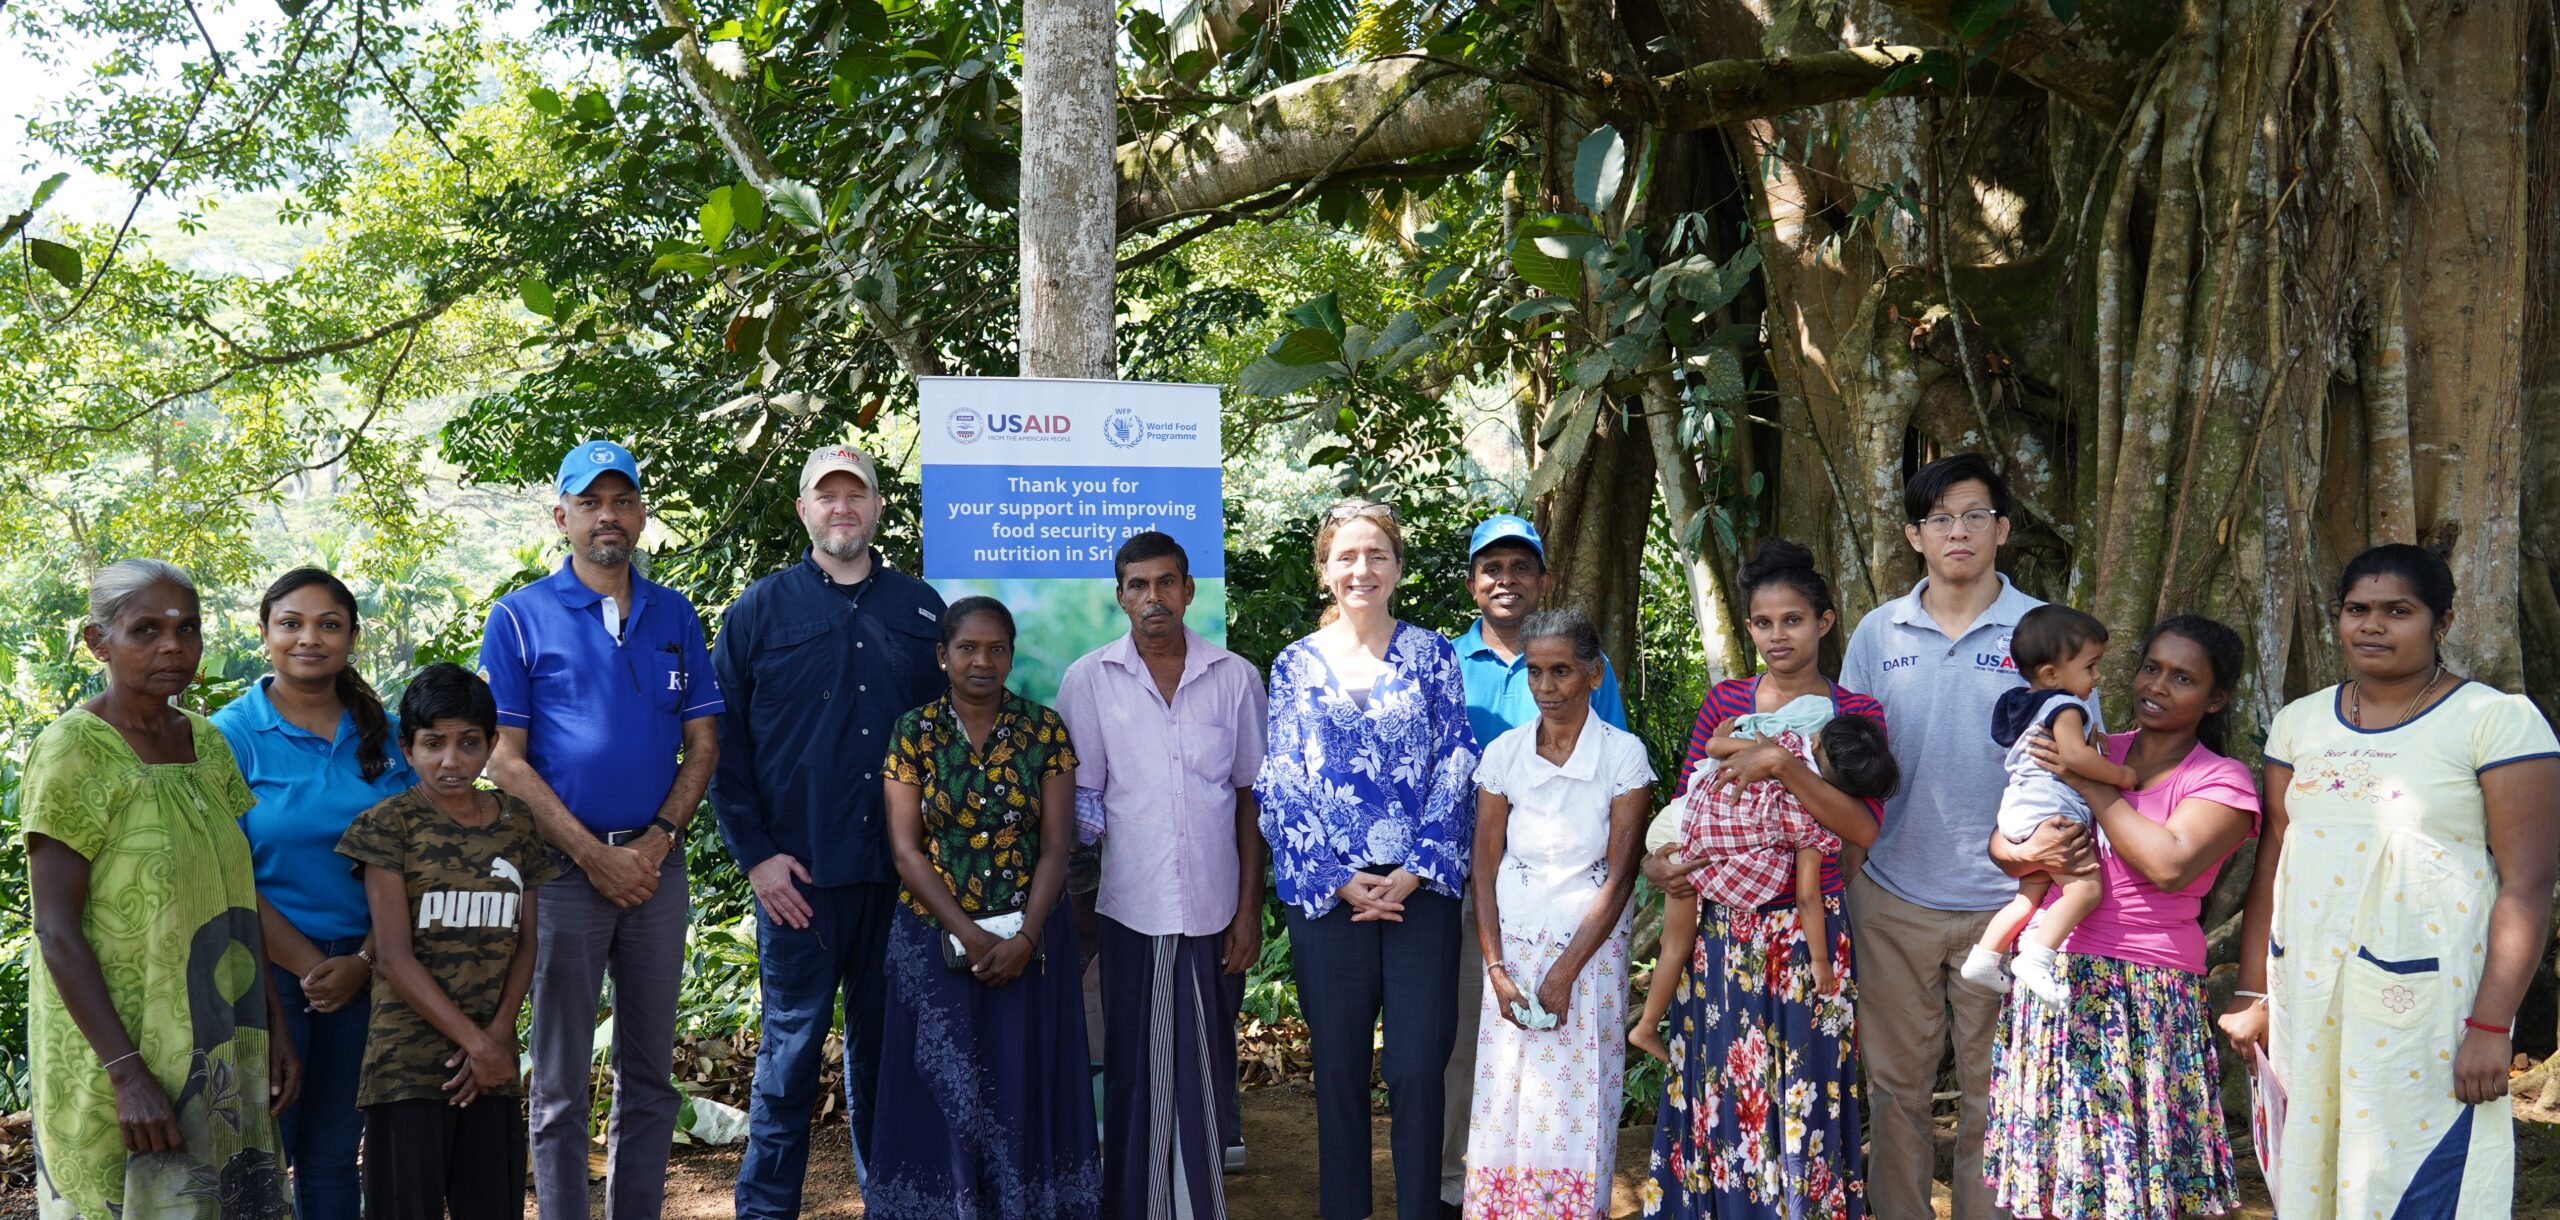 Senior USAID official visits Sri Lanka to understand needs of food-insecure communities